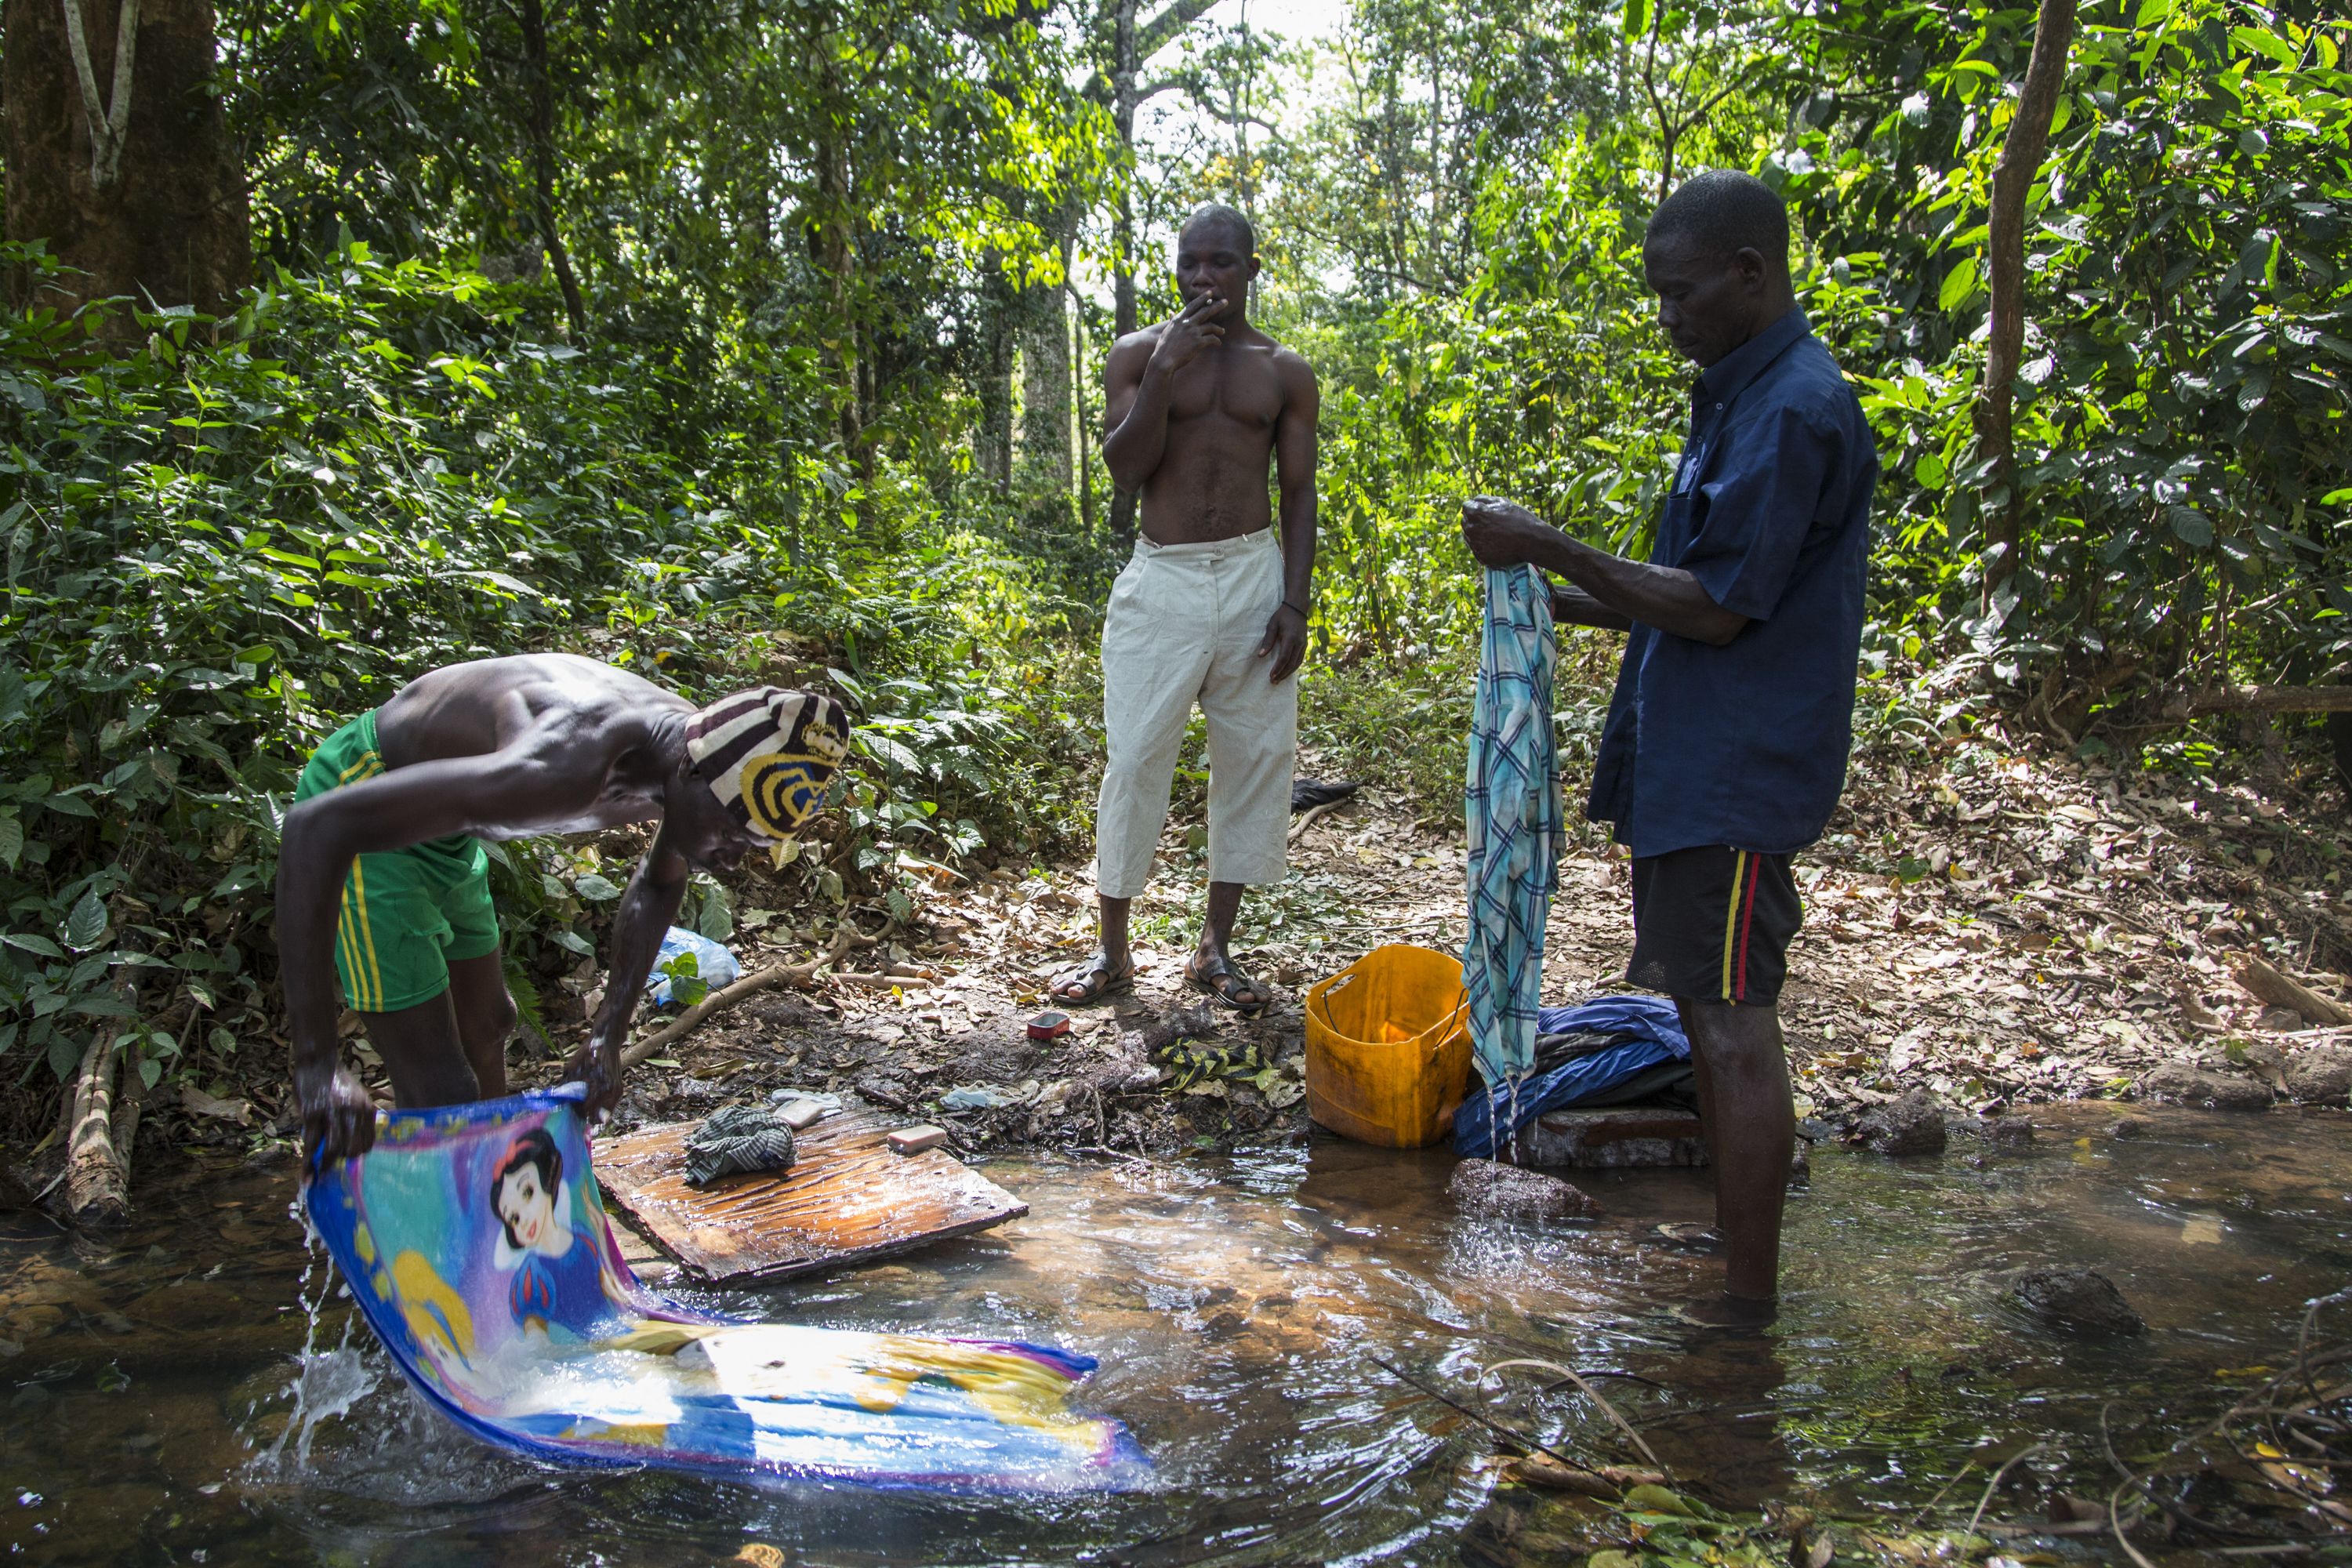 Chinko employees wash their clothes and other belongings in a stream near the park's main base. Image by Jack Losh. Central African Republic, 2018.